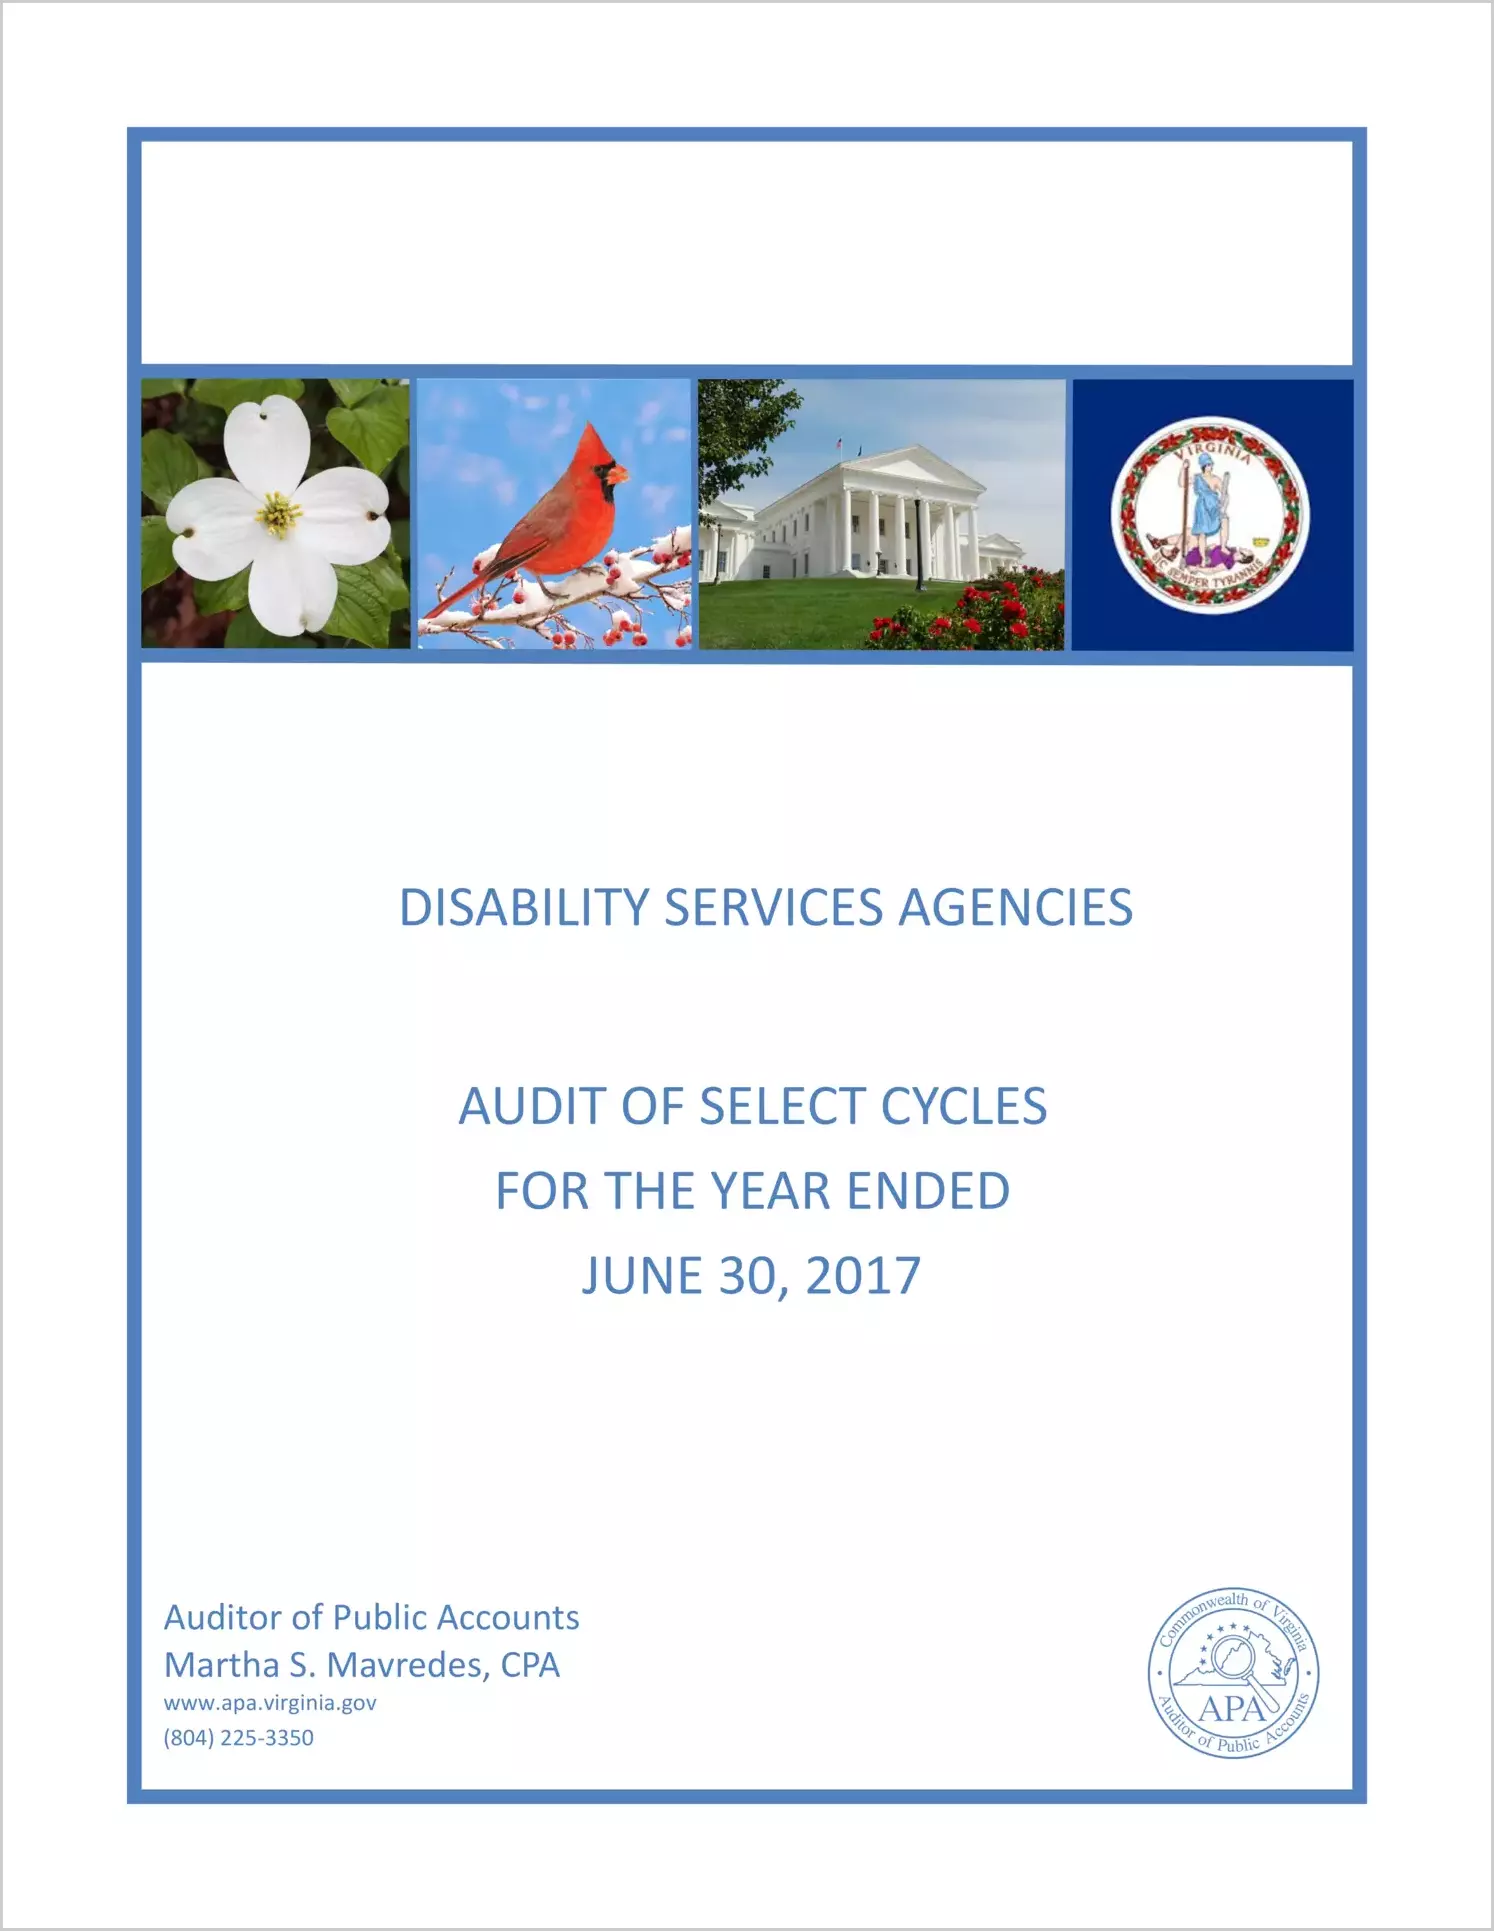 Disability Services Agencies Audit of Select Cycles for the year ended June 30, 2017